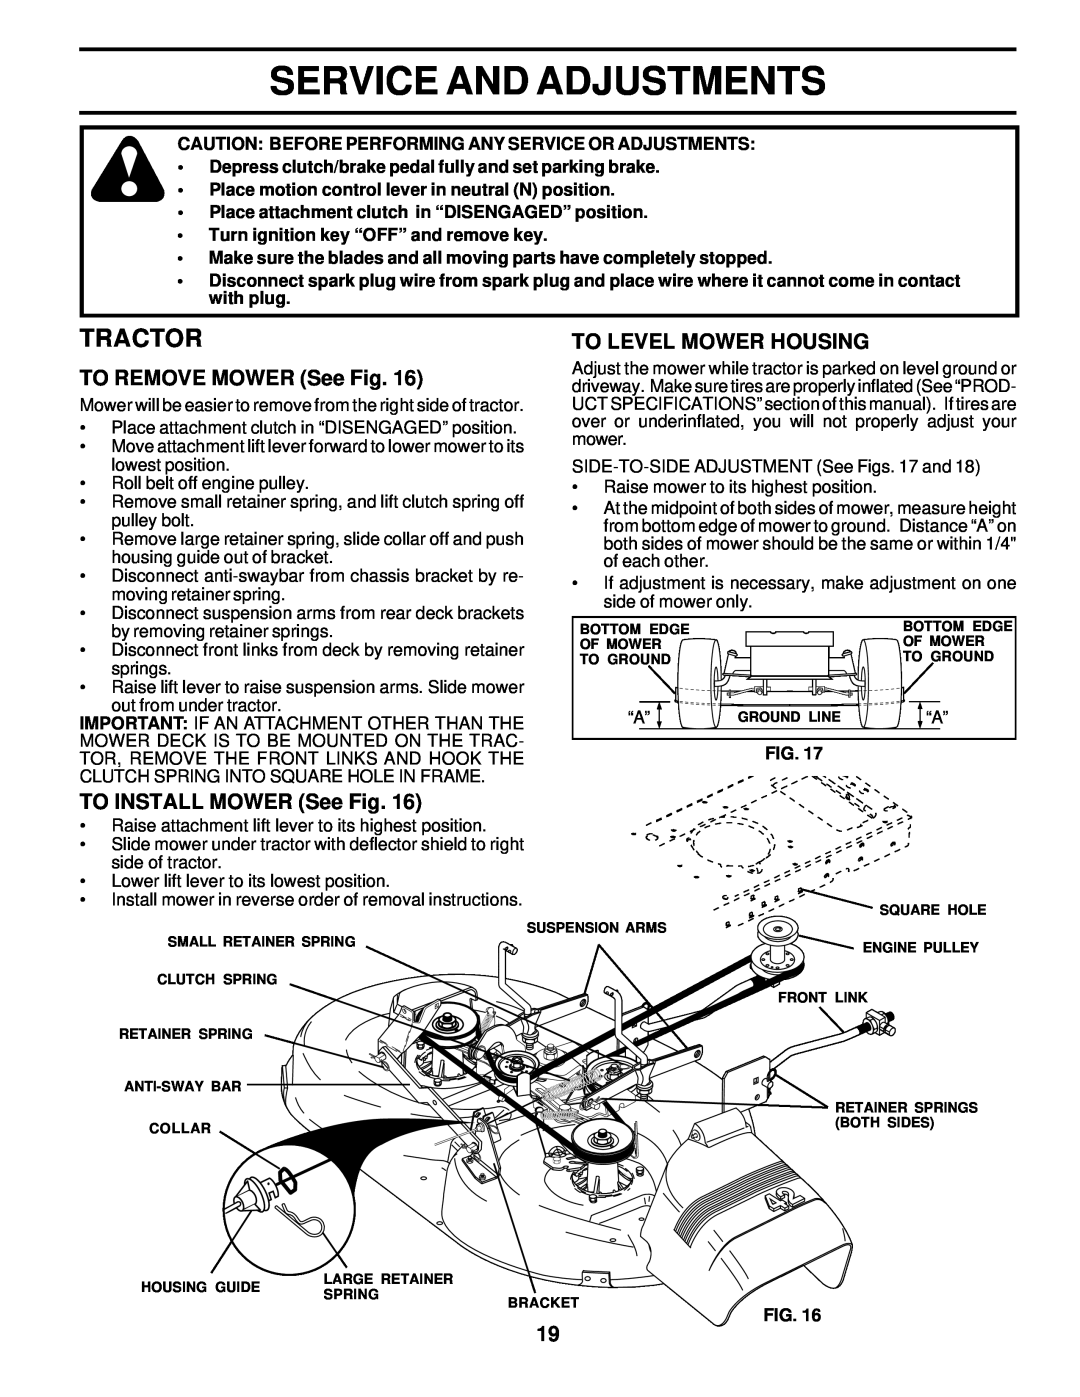 Weed Eater 177019 manual Service And Adjustments, TO REMOVE MOWER See Fig, To Level Mower Housing, TO INSTALL MOWER See Fig 